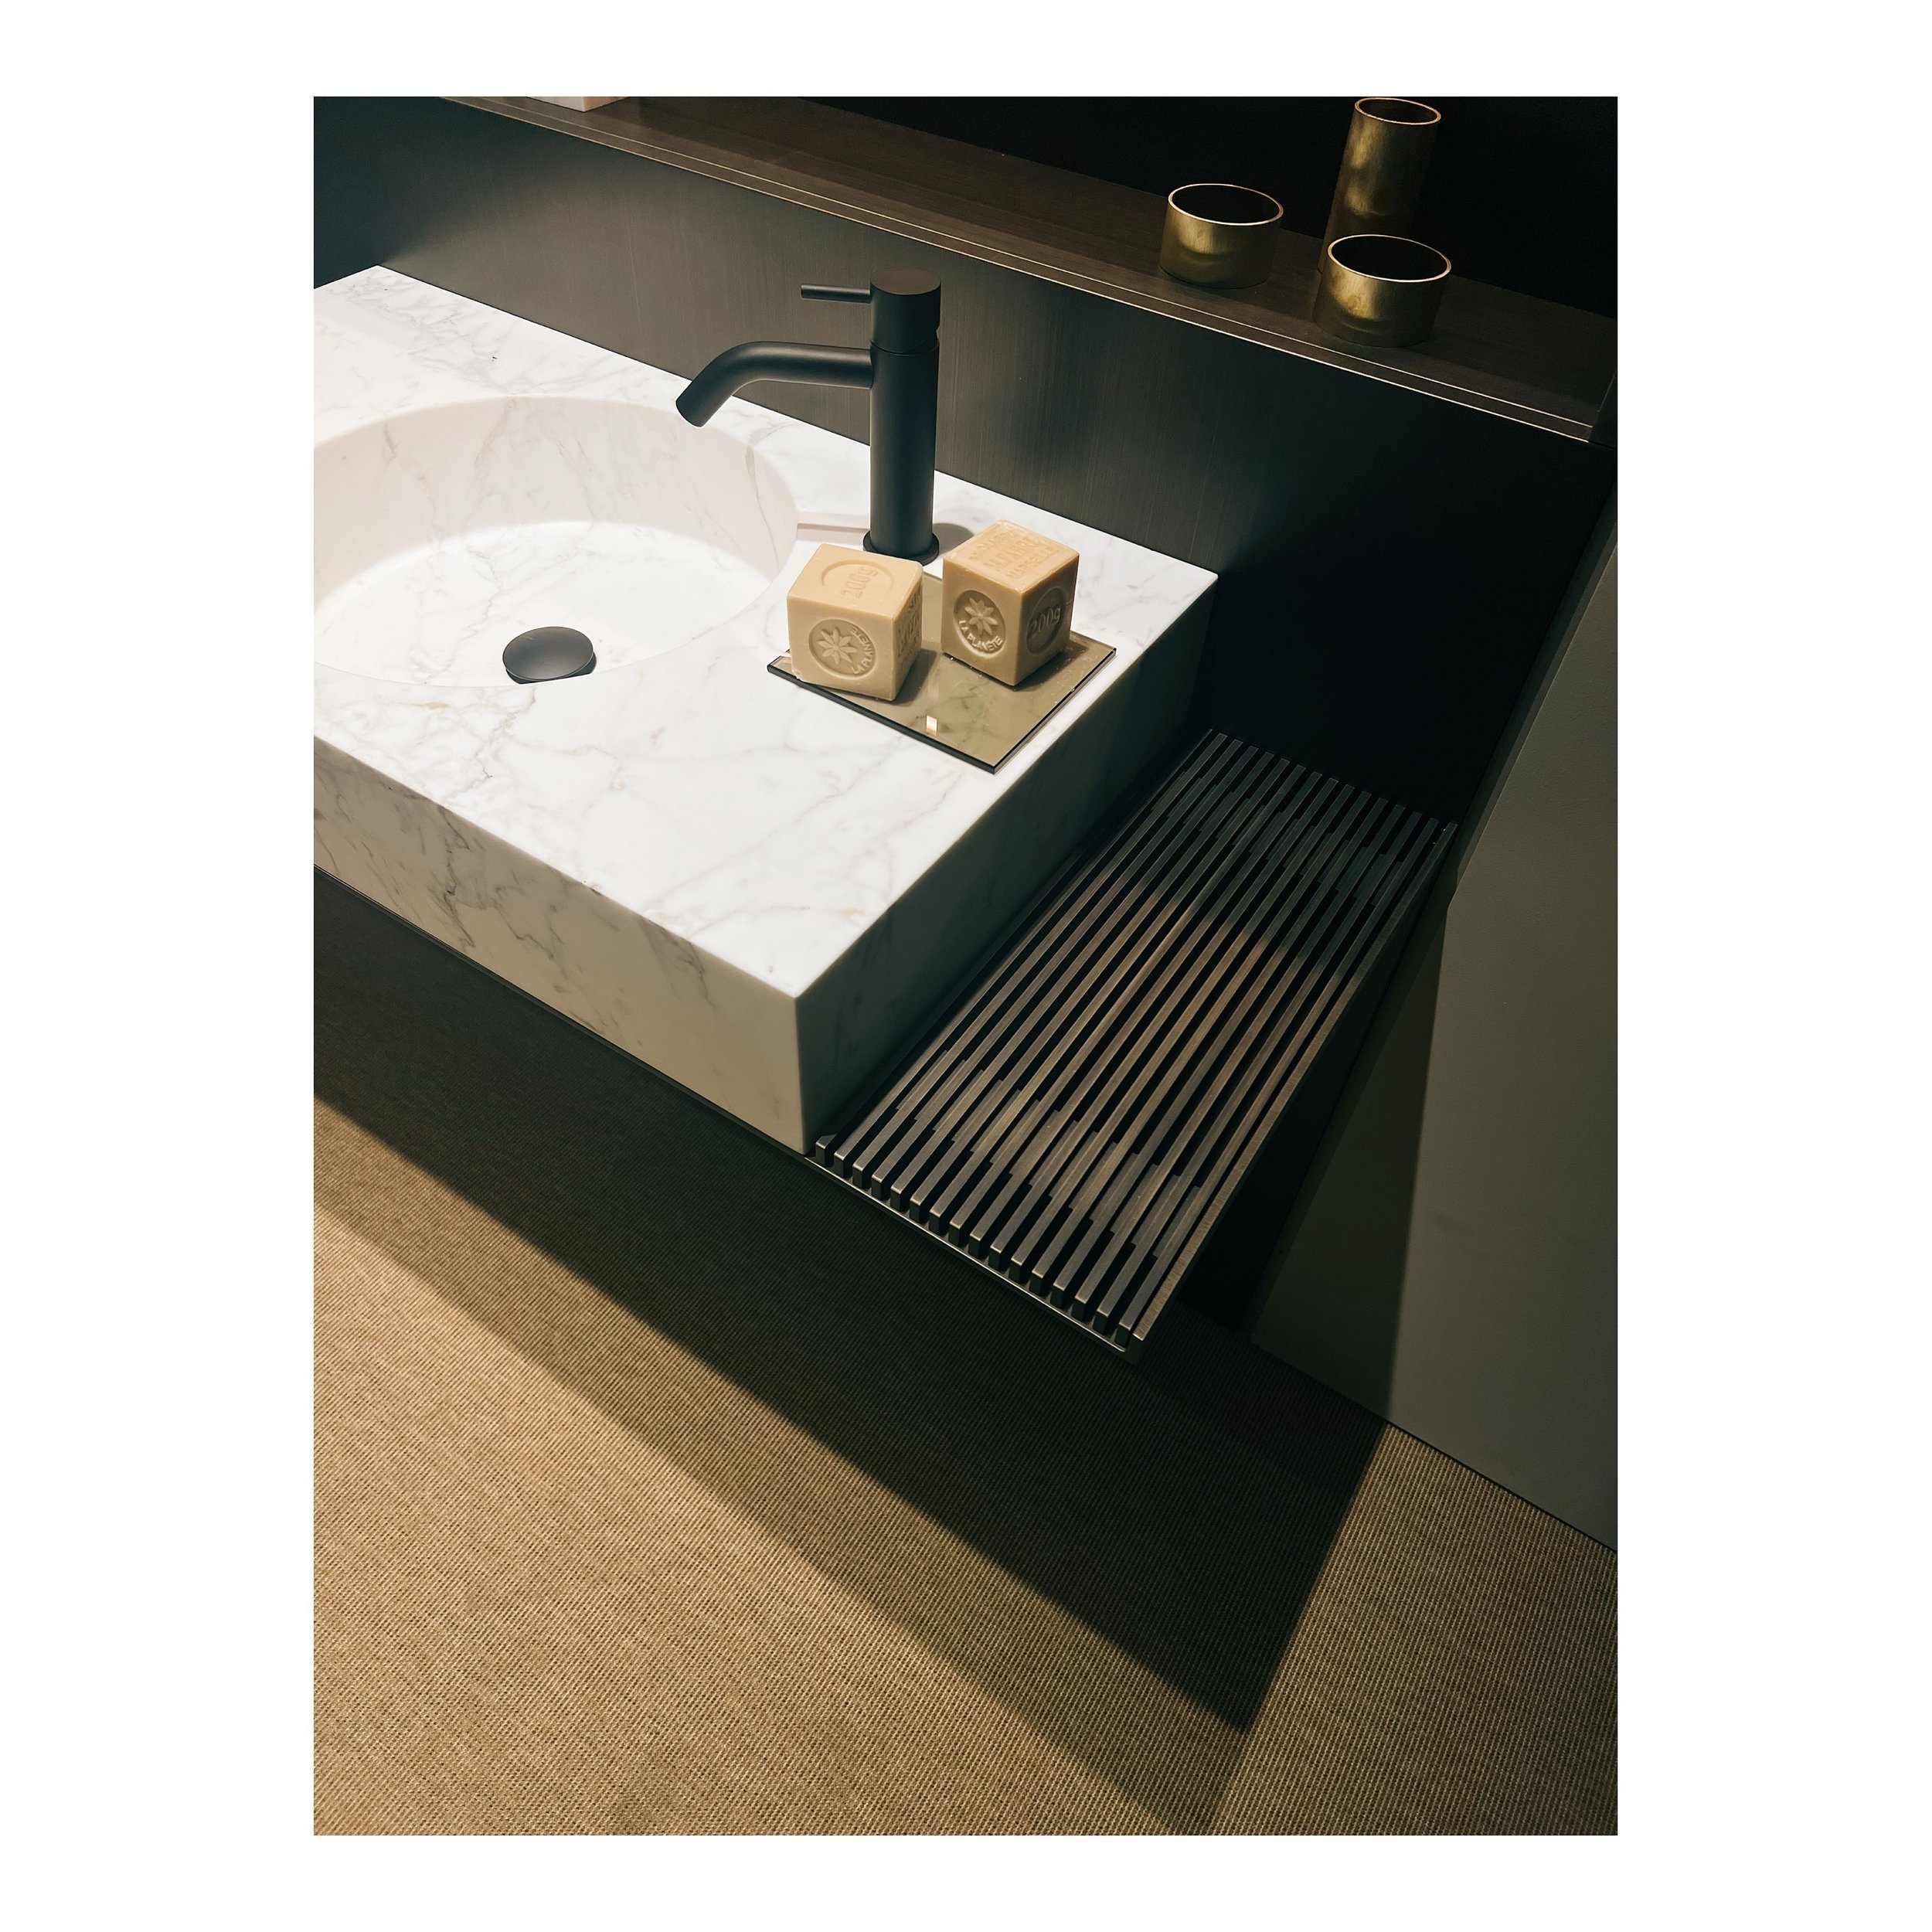 MAKRO bathrooms are always innovating. Here Corian is finished in brushed metallic lacquer to create a bathroom systems that capture the essence of metal, without the effects of water and time. The metal is offset by the beautiful mono block of marbl